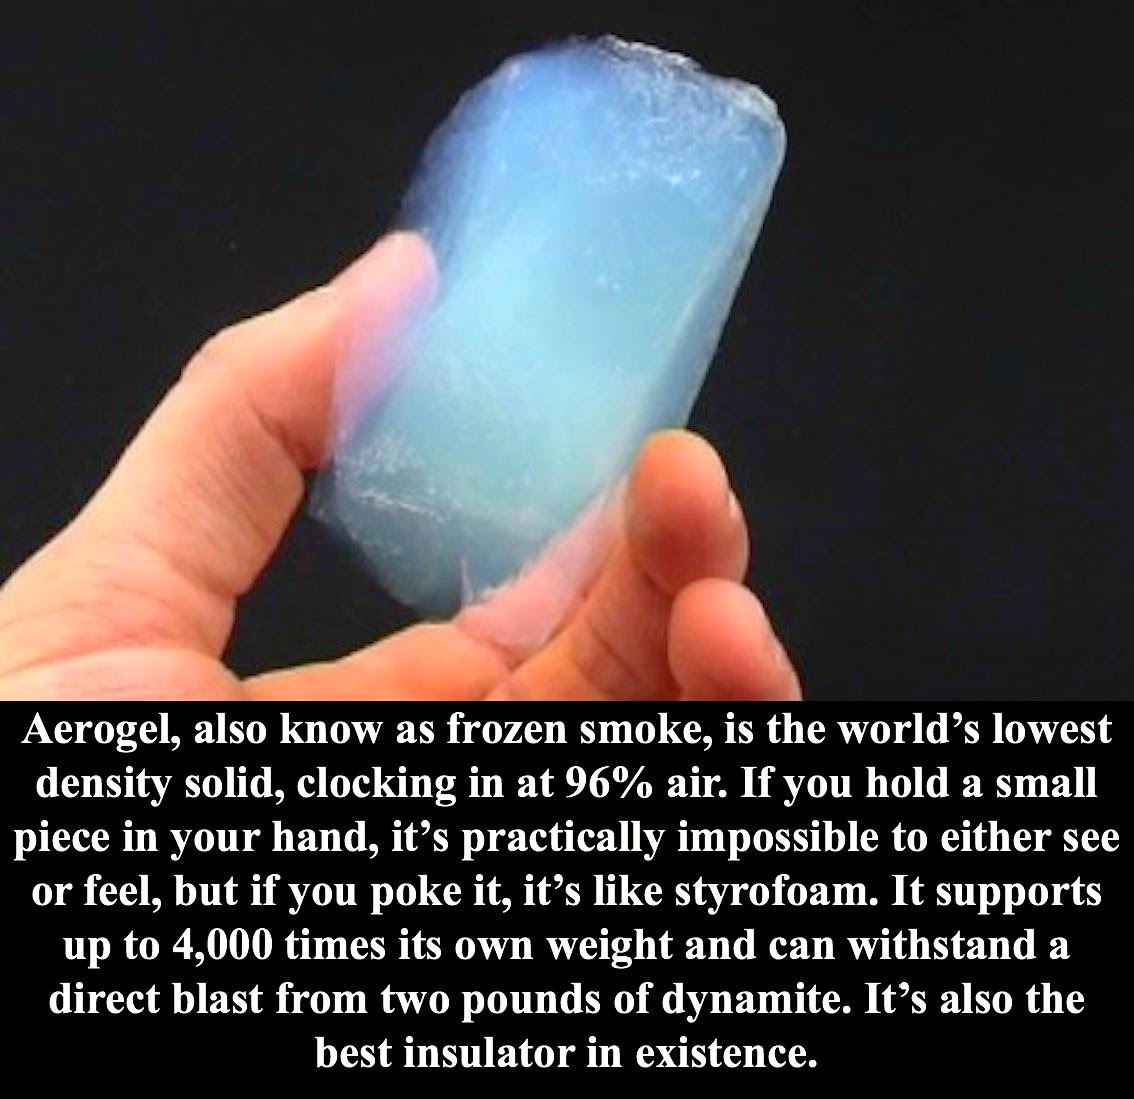 weird science facts - Aerogel, also know as frozen smoke, is the world's lowest density solid, clocking in at 96% air. If you hold a small piece in your hand, it's practically impossible to either see or feel, but if you poke it, it's styrofoam. It suppor